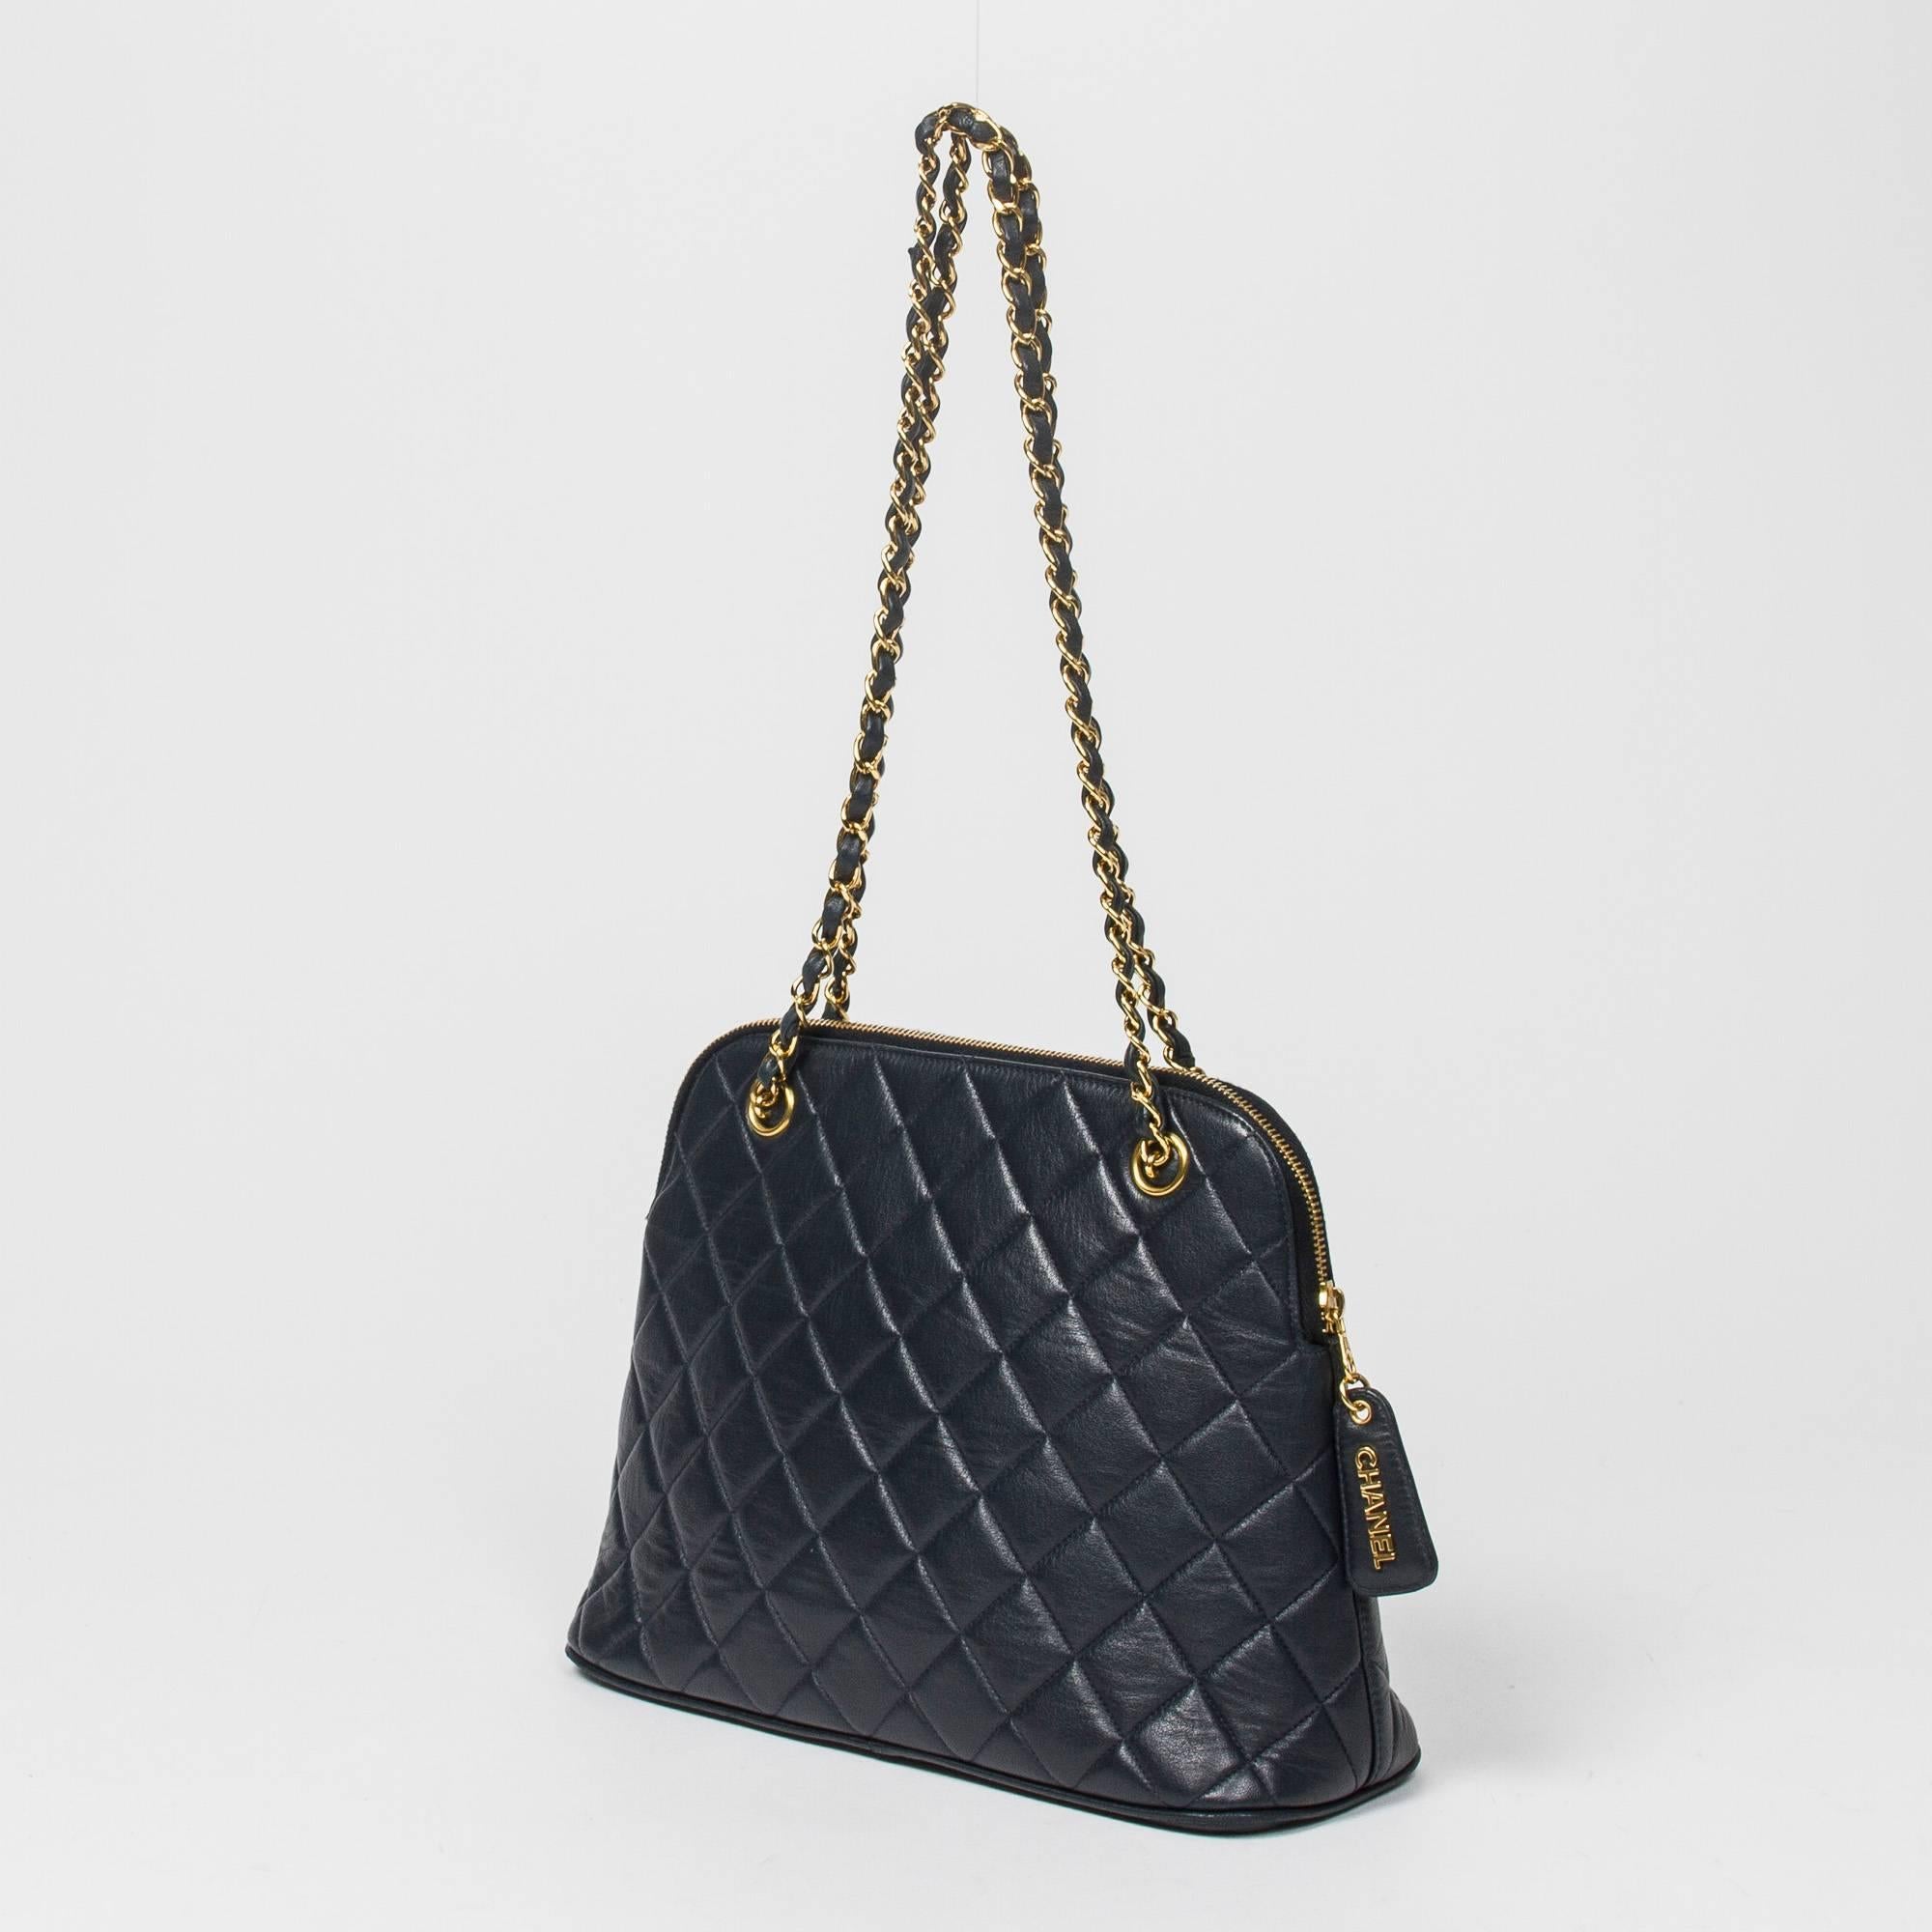 Shoulder bag in Navy blue quilted leather with double chain strap interlaced with leather, gold tone hardware. Zip closure with 